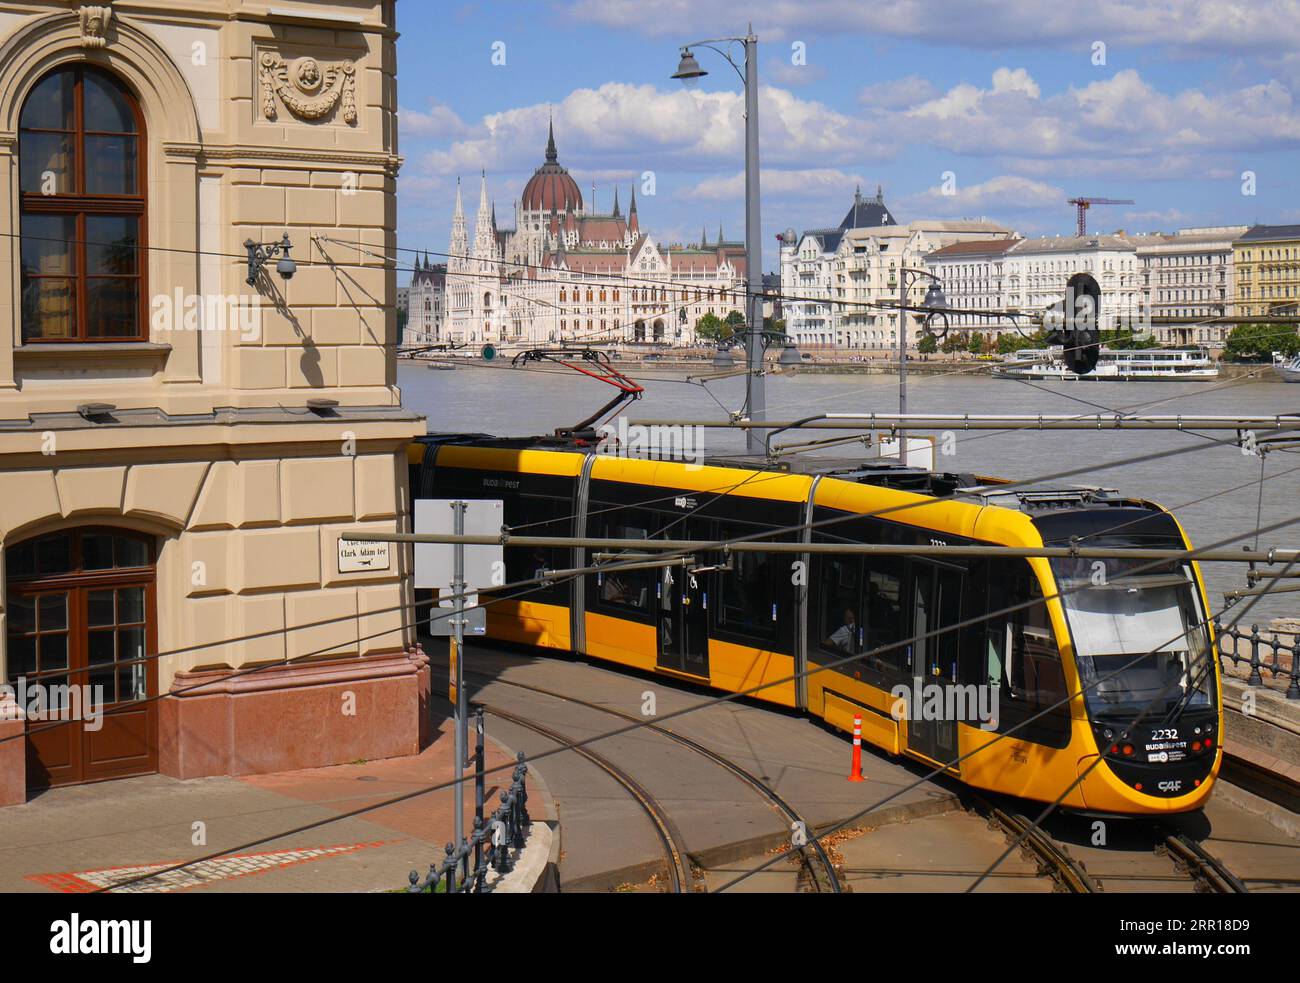 A tram on the Danube embankment with the parliament building across the River Danube in the background Stock Photo